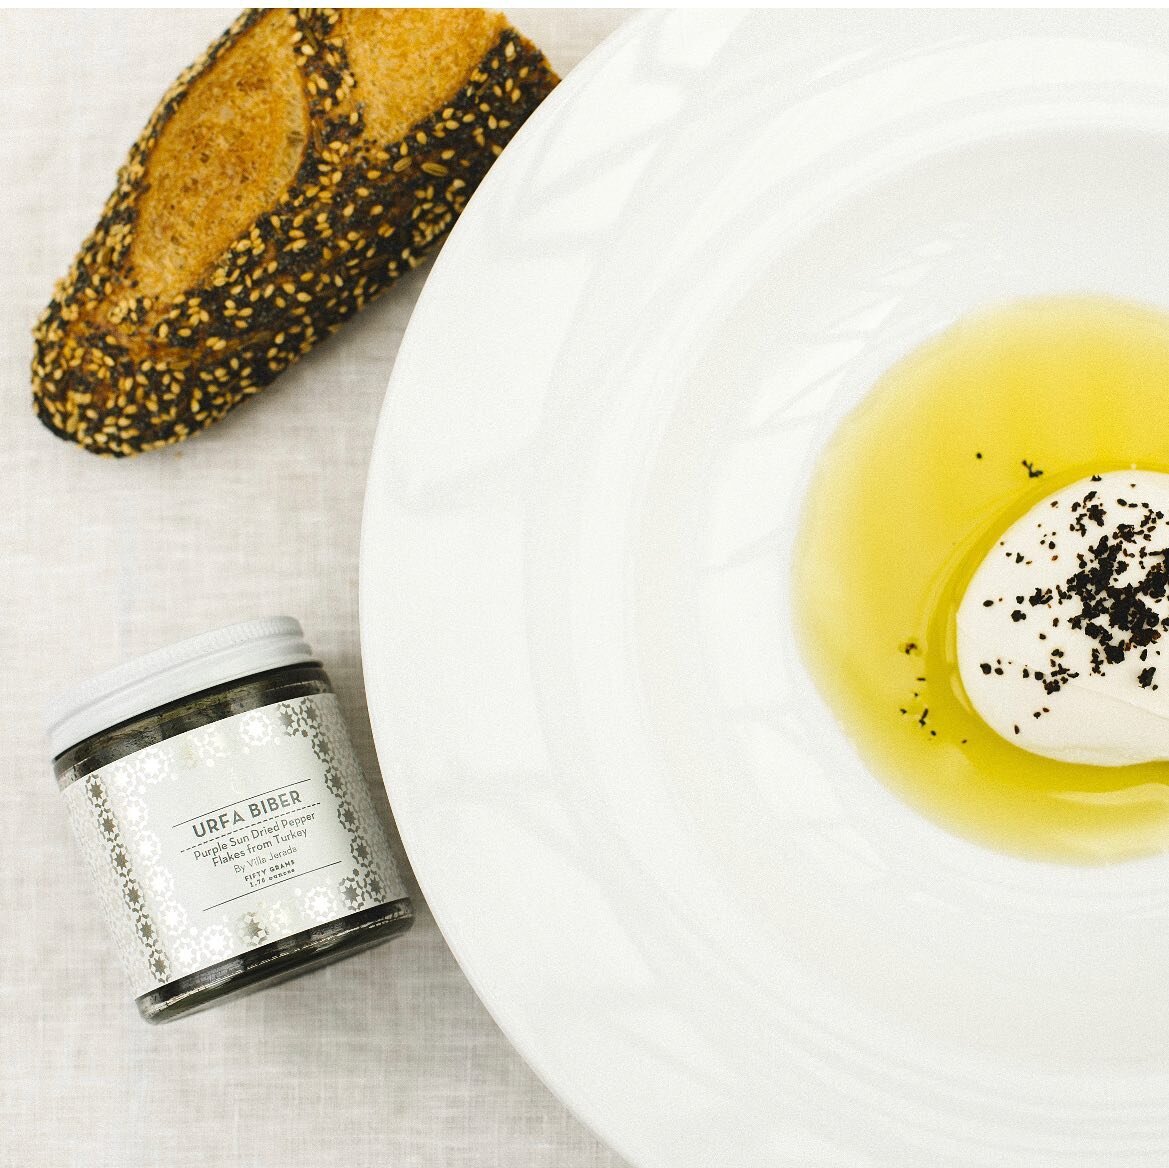 Favorite lunch/snack.
Burrata, urfa Biber, sweet and fruity Moroccan olive oil all mopped with a crunchy seeded baguette.
.
.
.
.
.
.
.
#villaeats #baguette #evoo #oliveoil #burrata #mozzarella #slowfood #eatwell